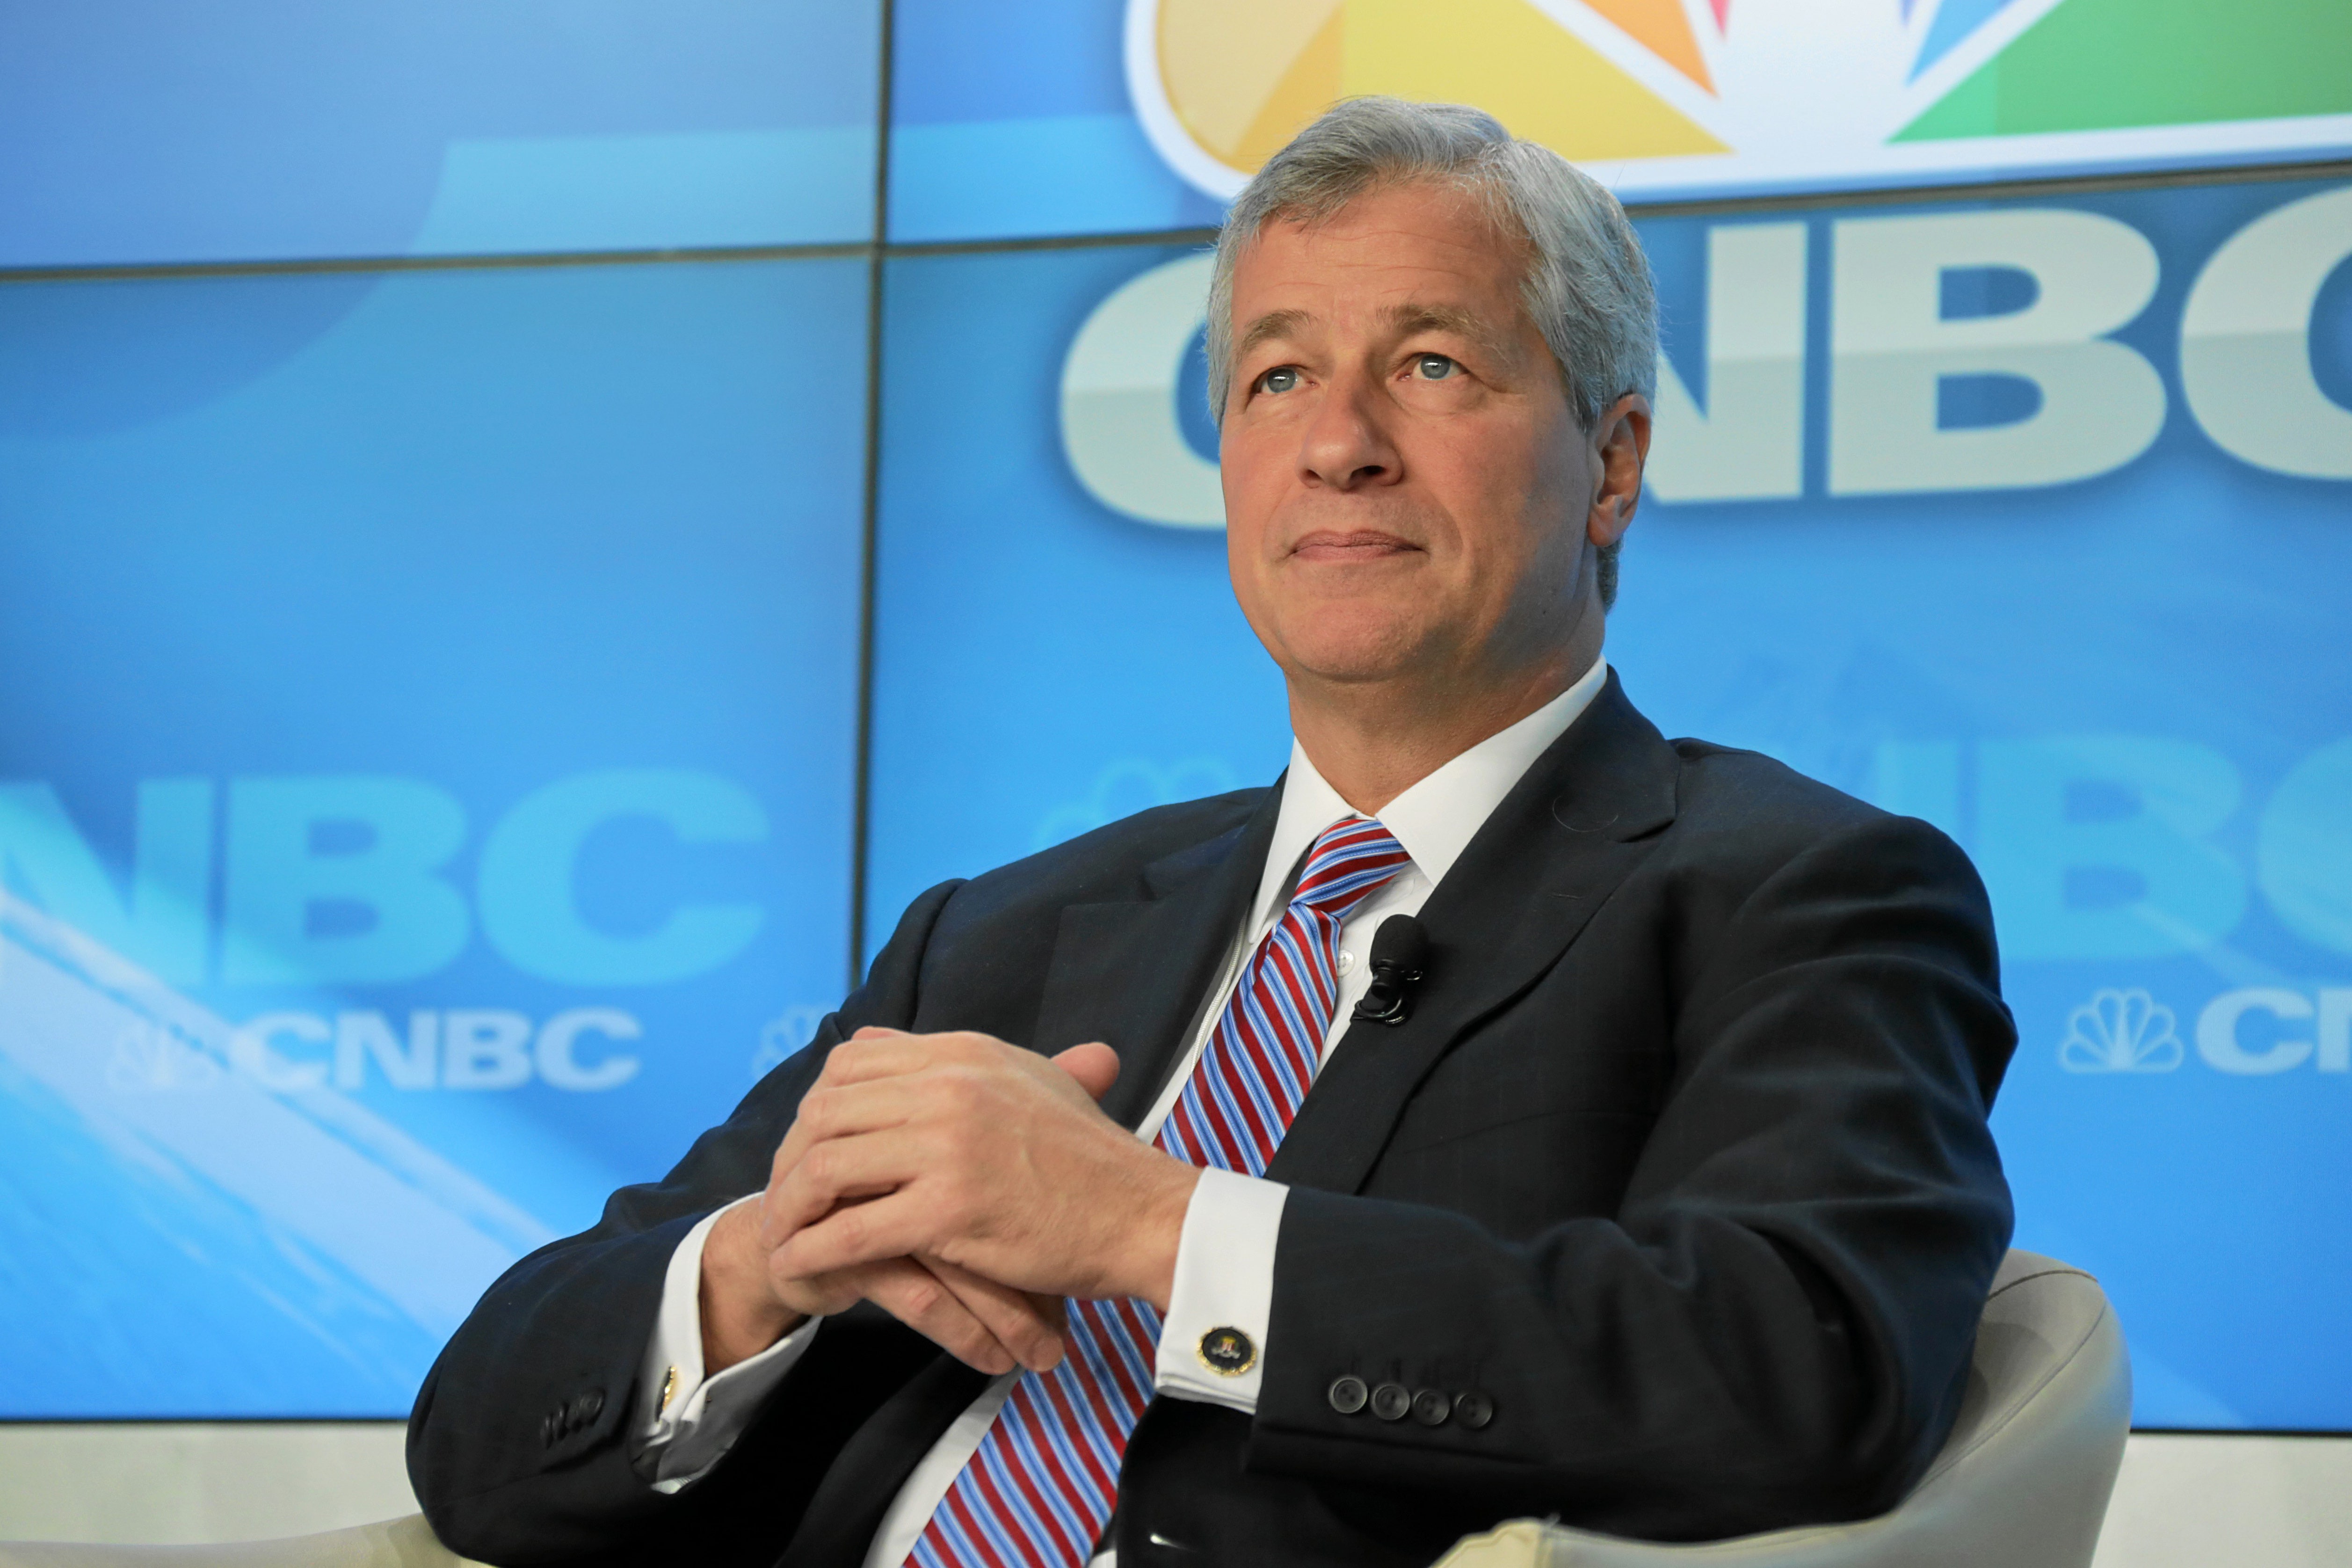 Jamie Dimon's Own Bank Has A Cryptocurrency But Says Bitcoin 'Not My Cup Of Tea'